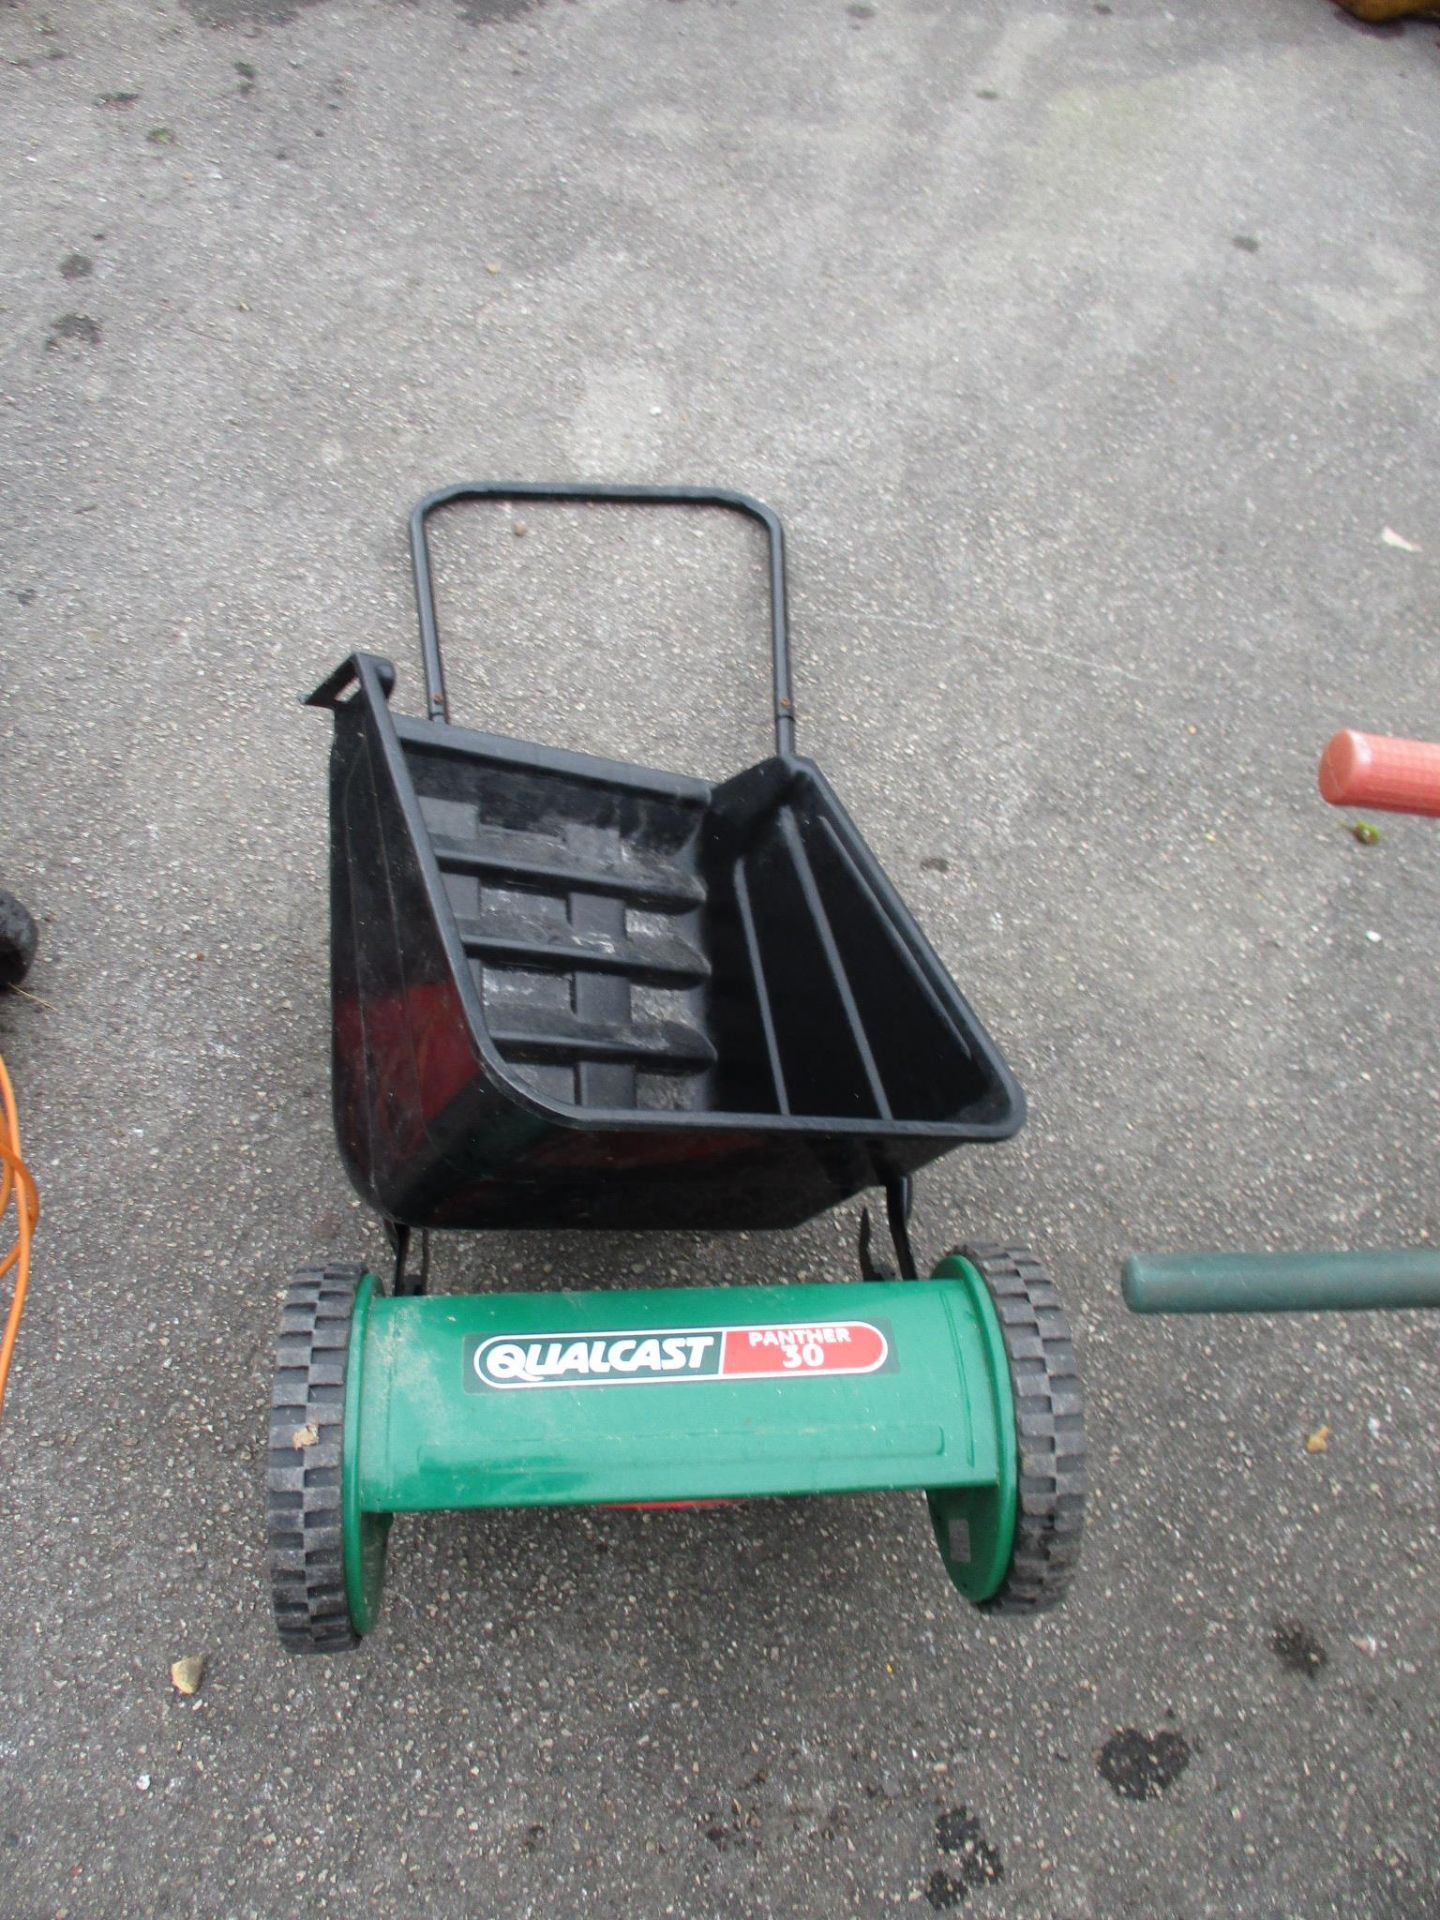 QUALCAST PANTHER 30 HAND MOWER